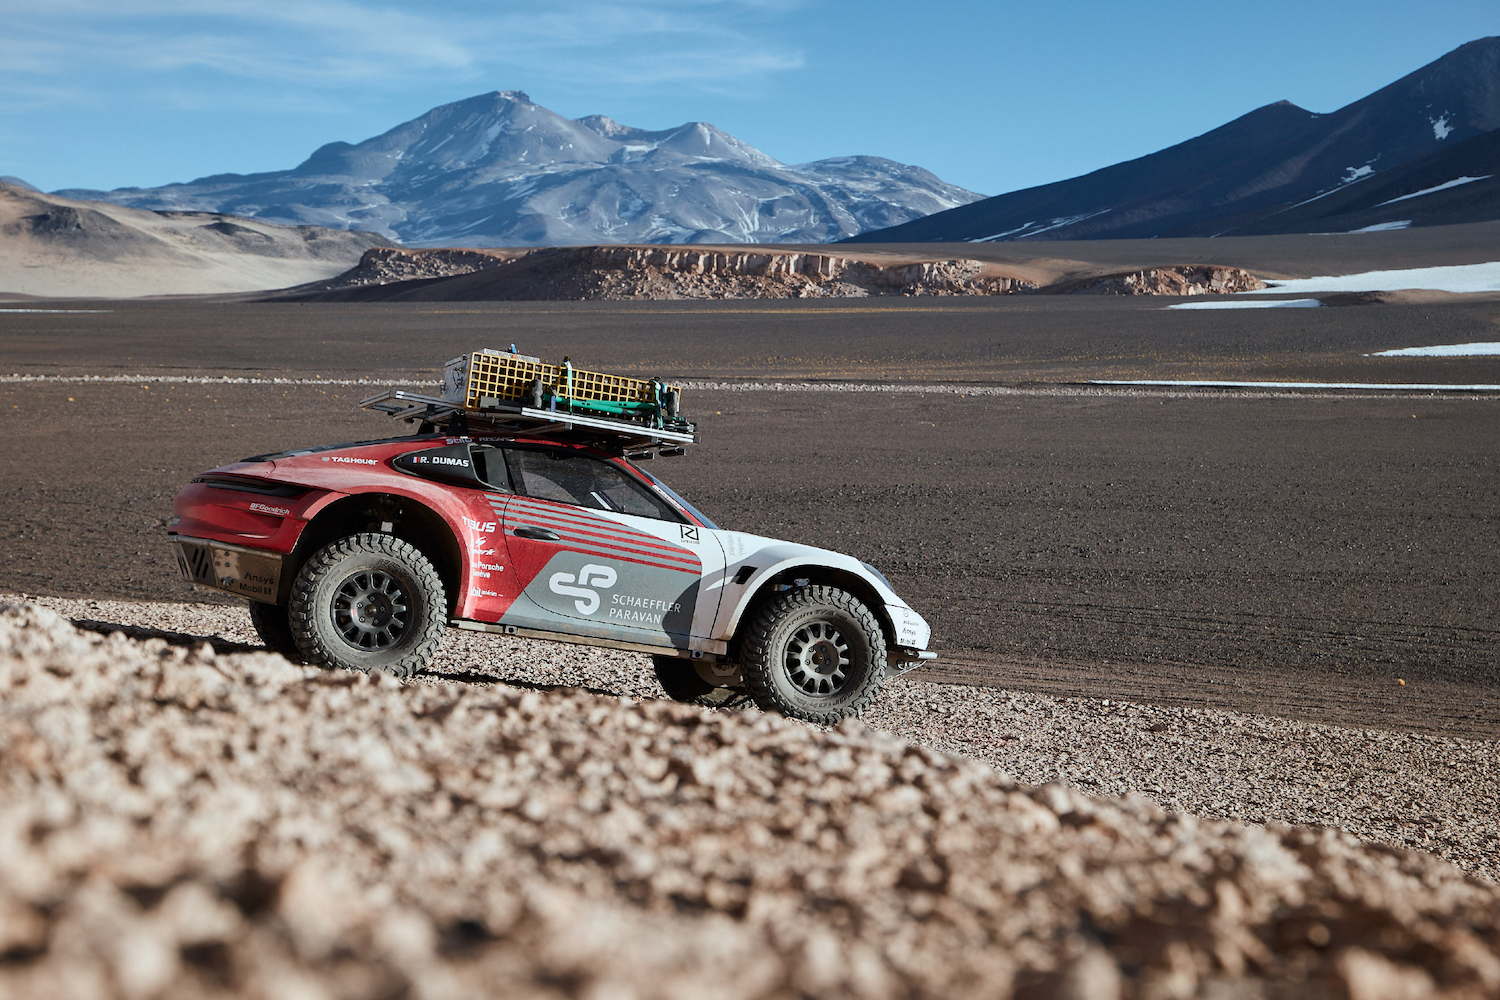 Porsche 911 Dakar Prototype going down a rocky hill with mountains and blue skies in the back.